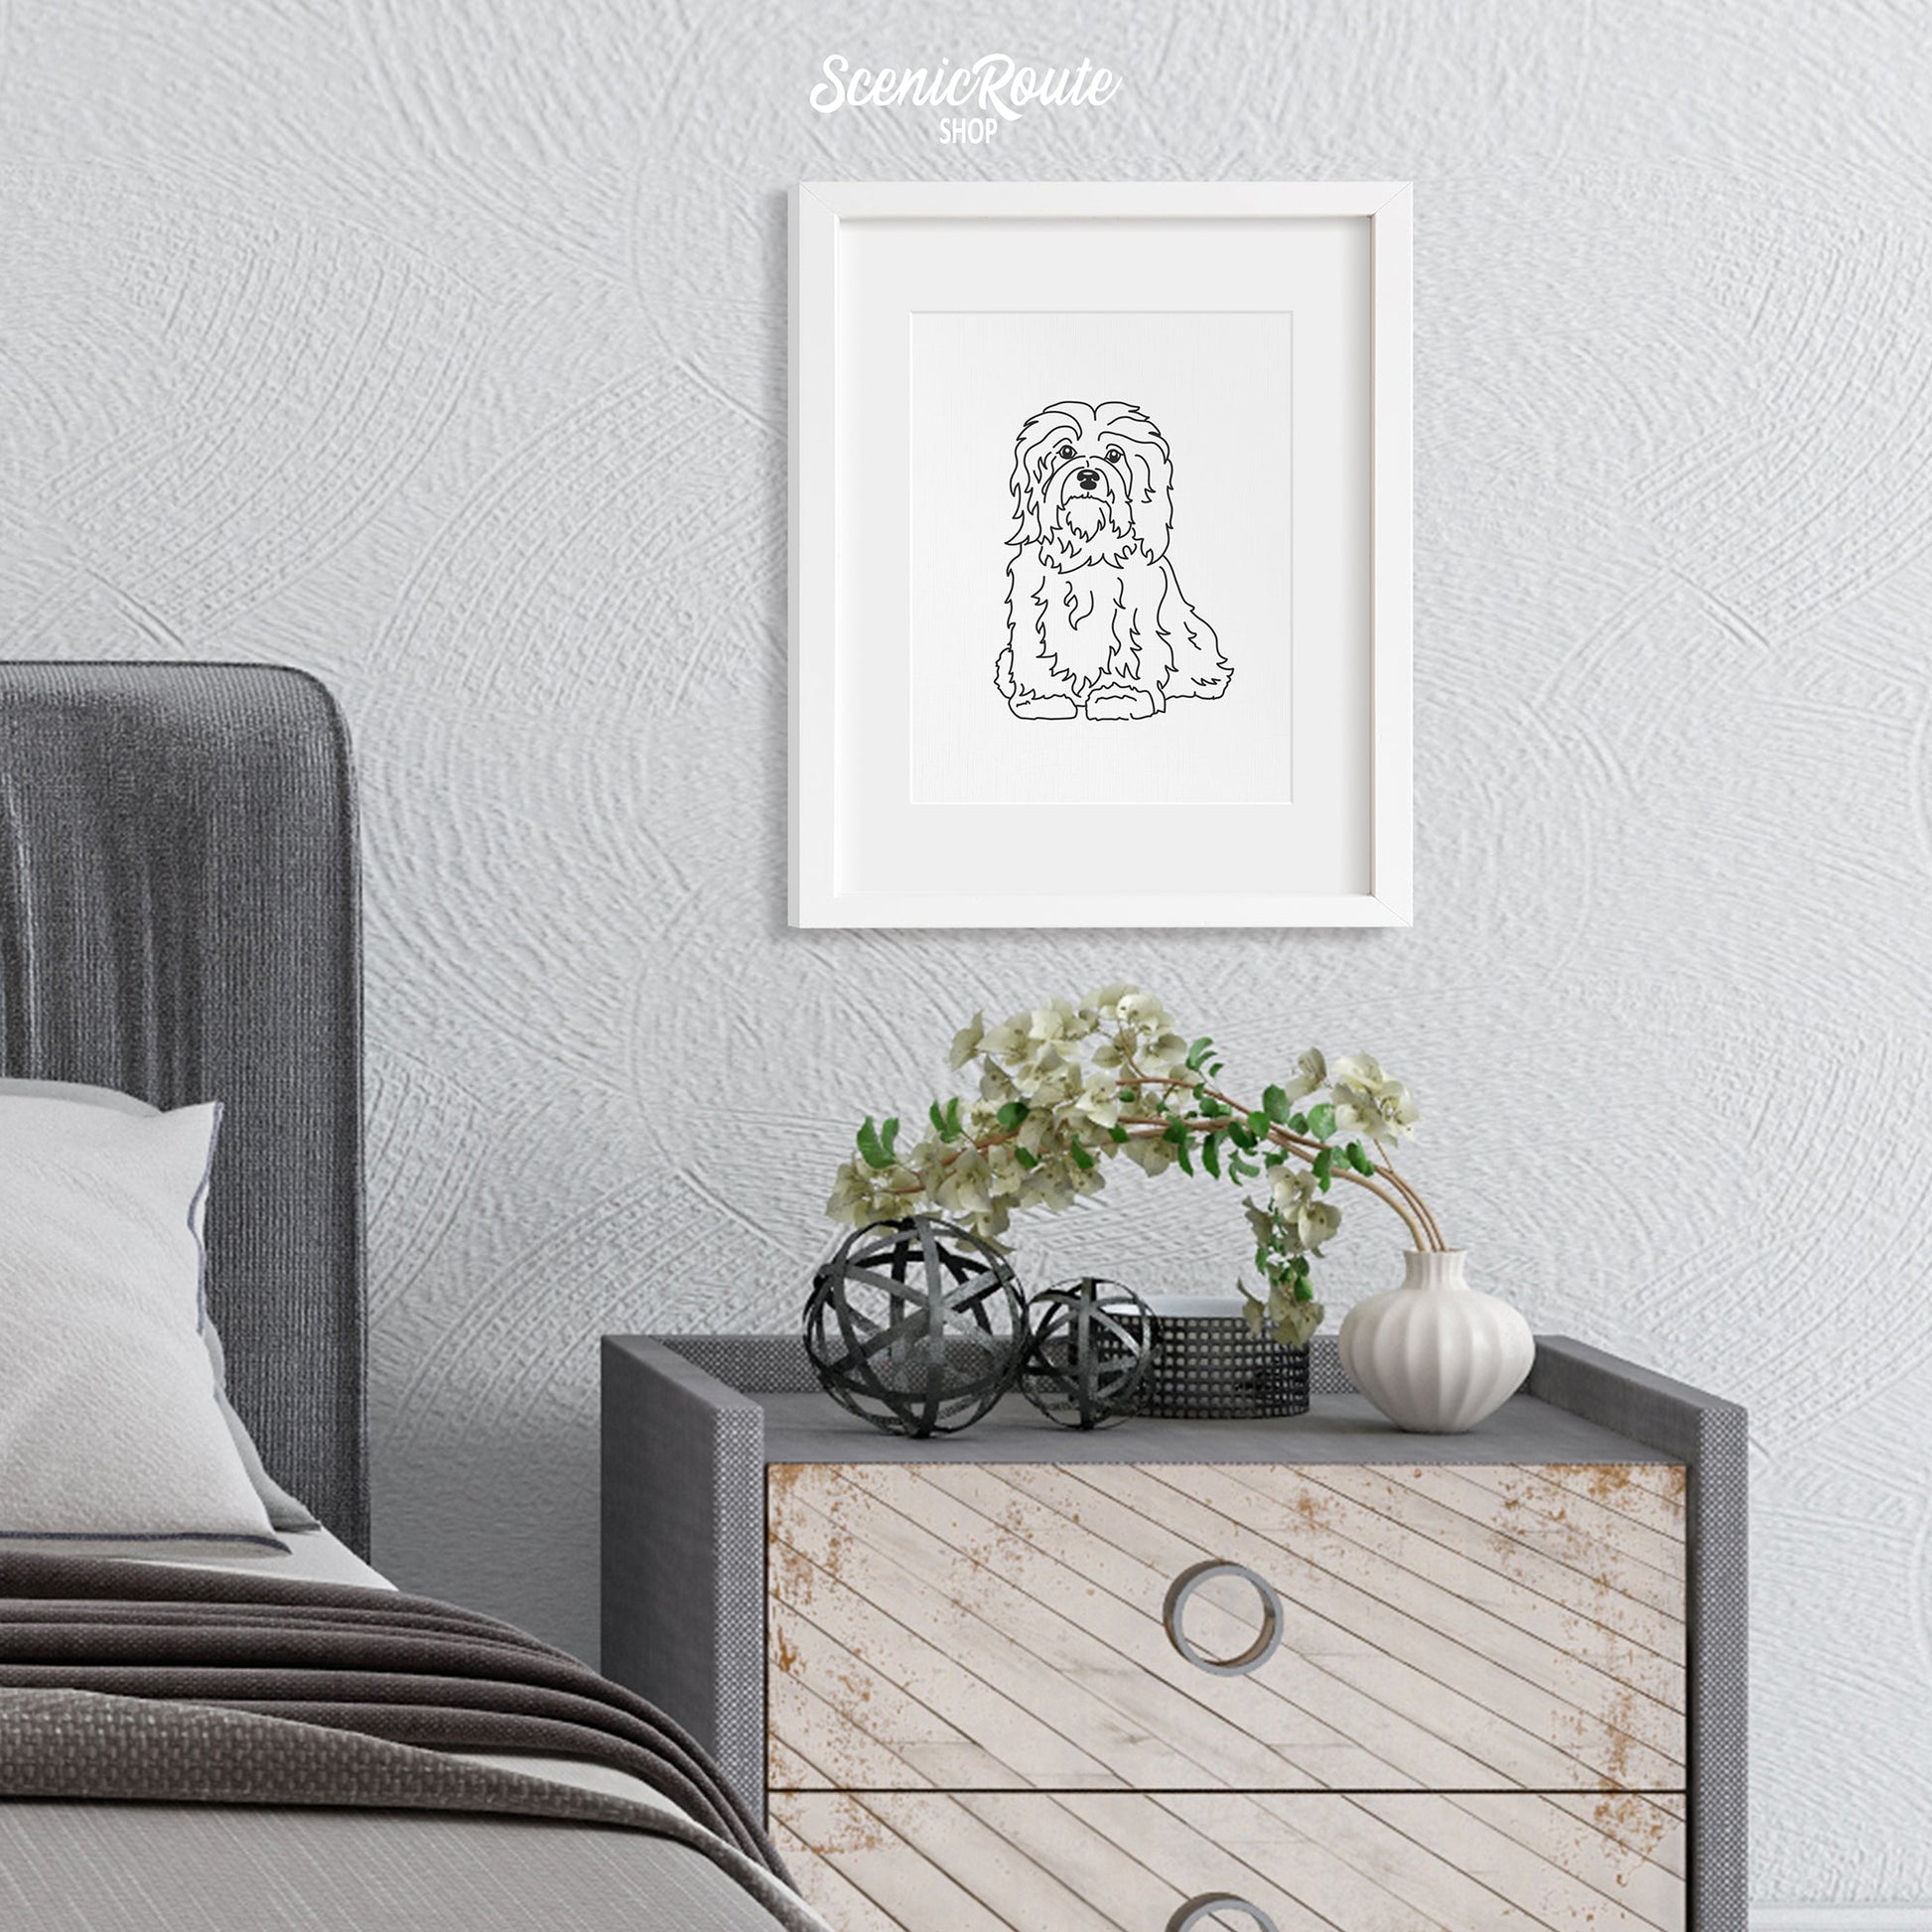 A framed line art drawing of a Havanese dog above a nightstand next to a bed